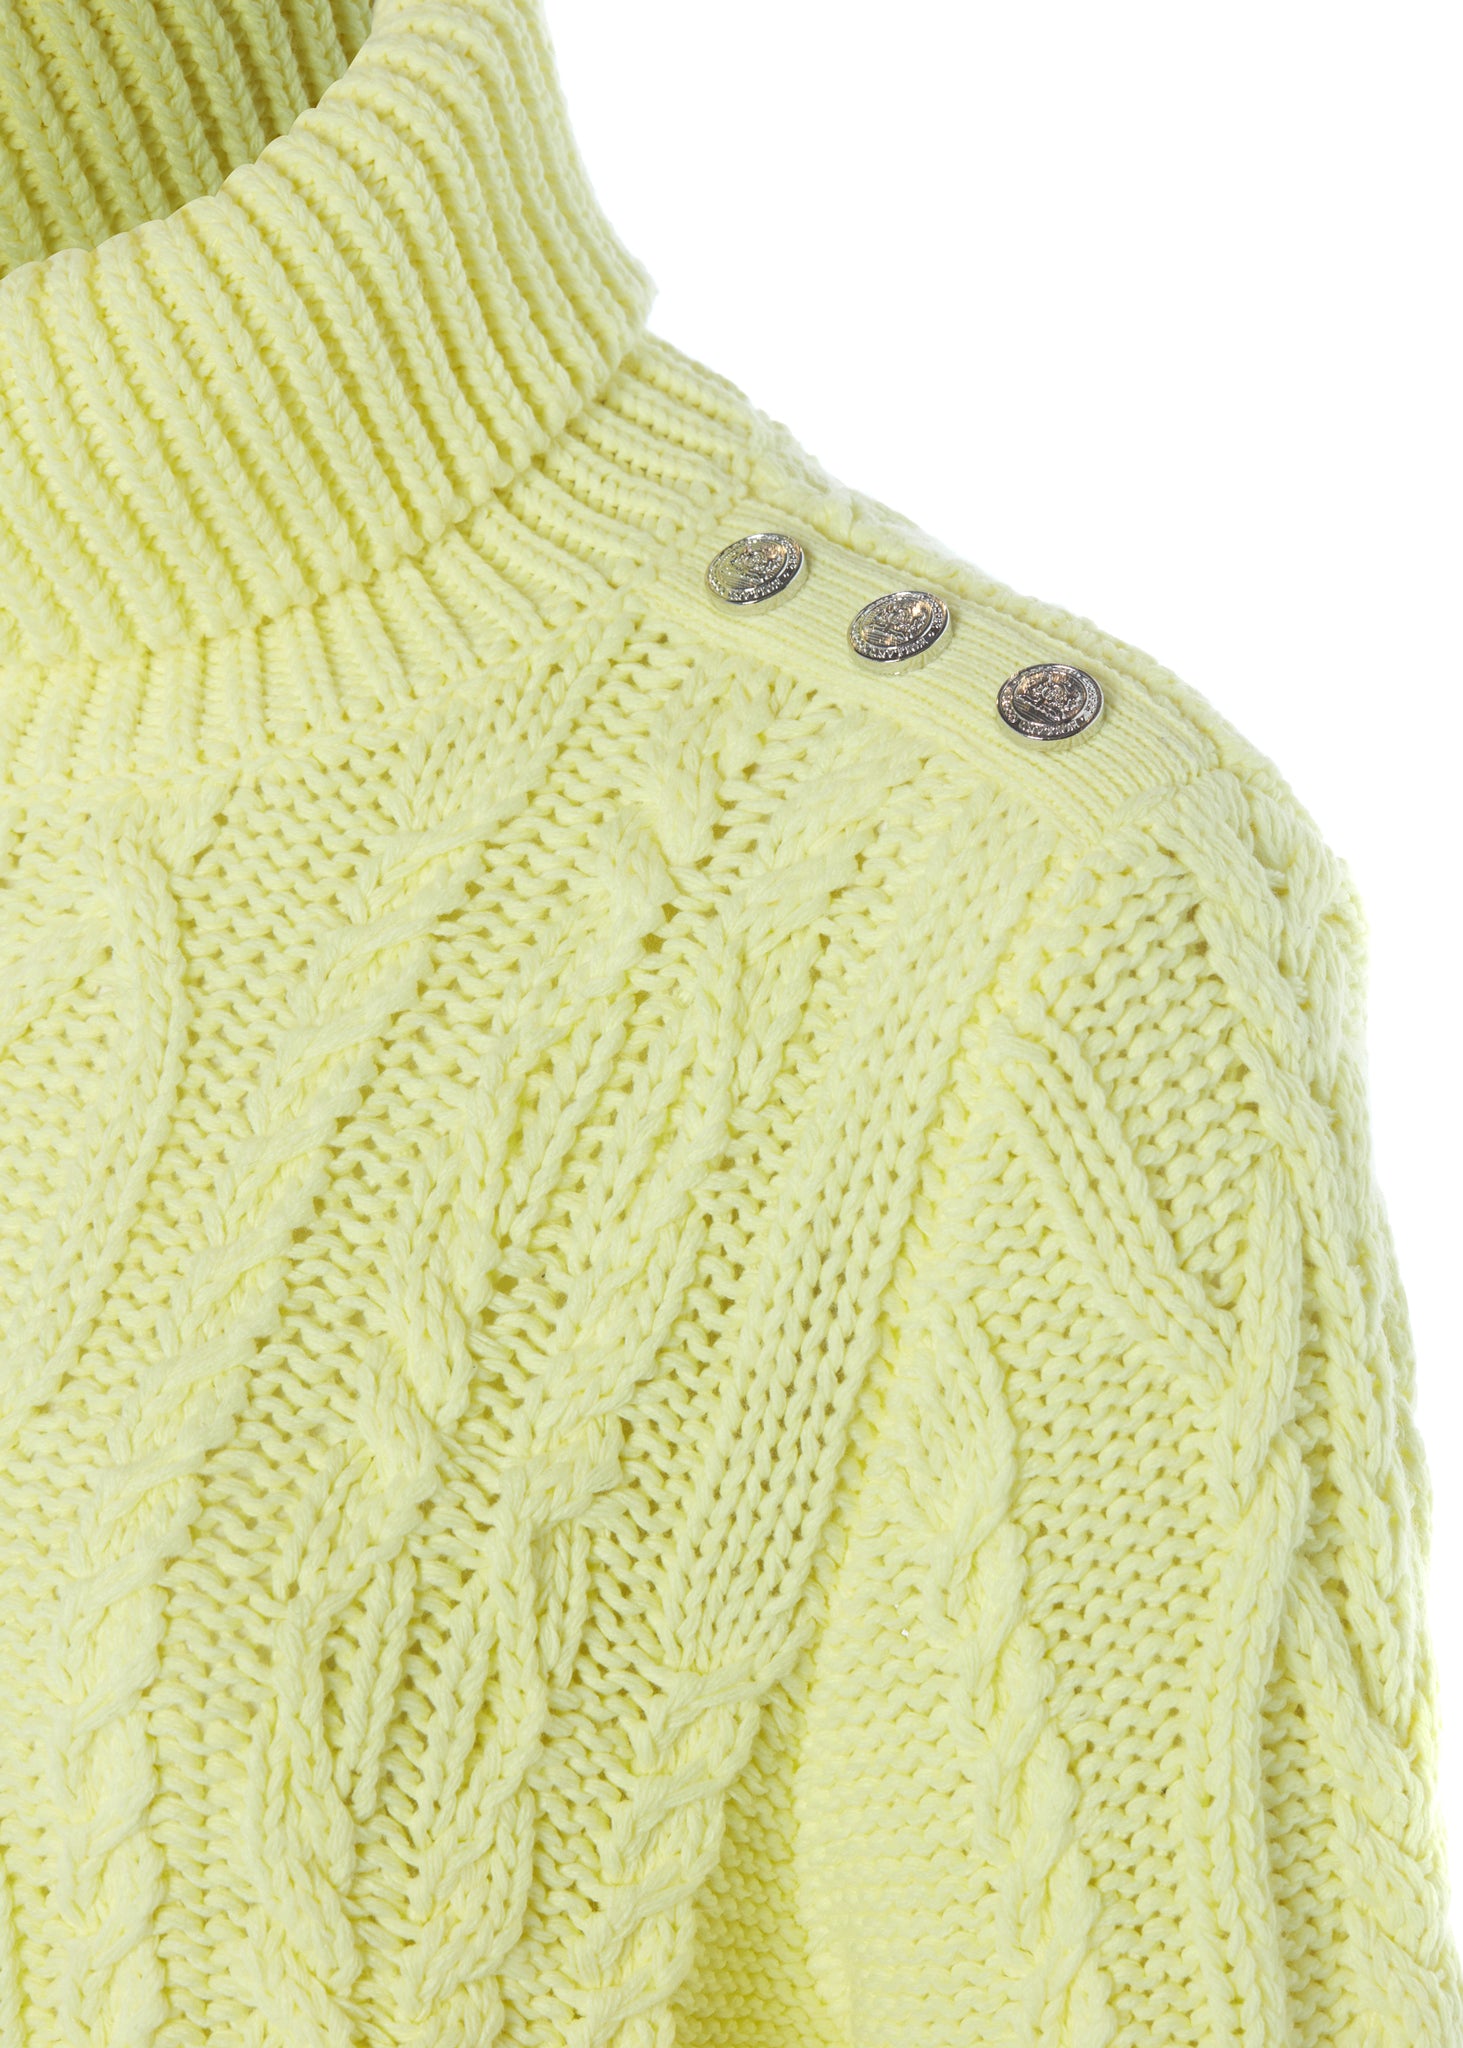 silver button detail across shoulders chunky cable knit jumper in lemon yellow with ribbed roll neck hem and cuffs